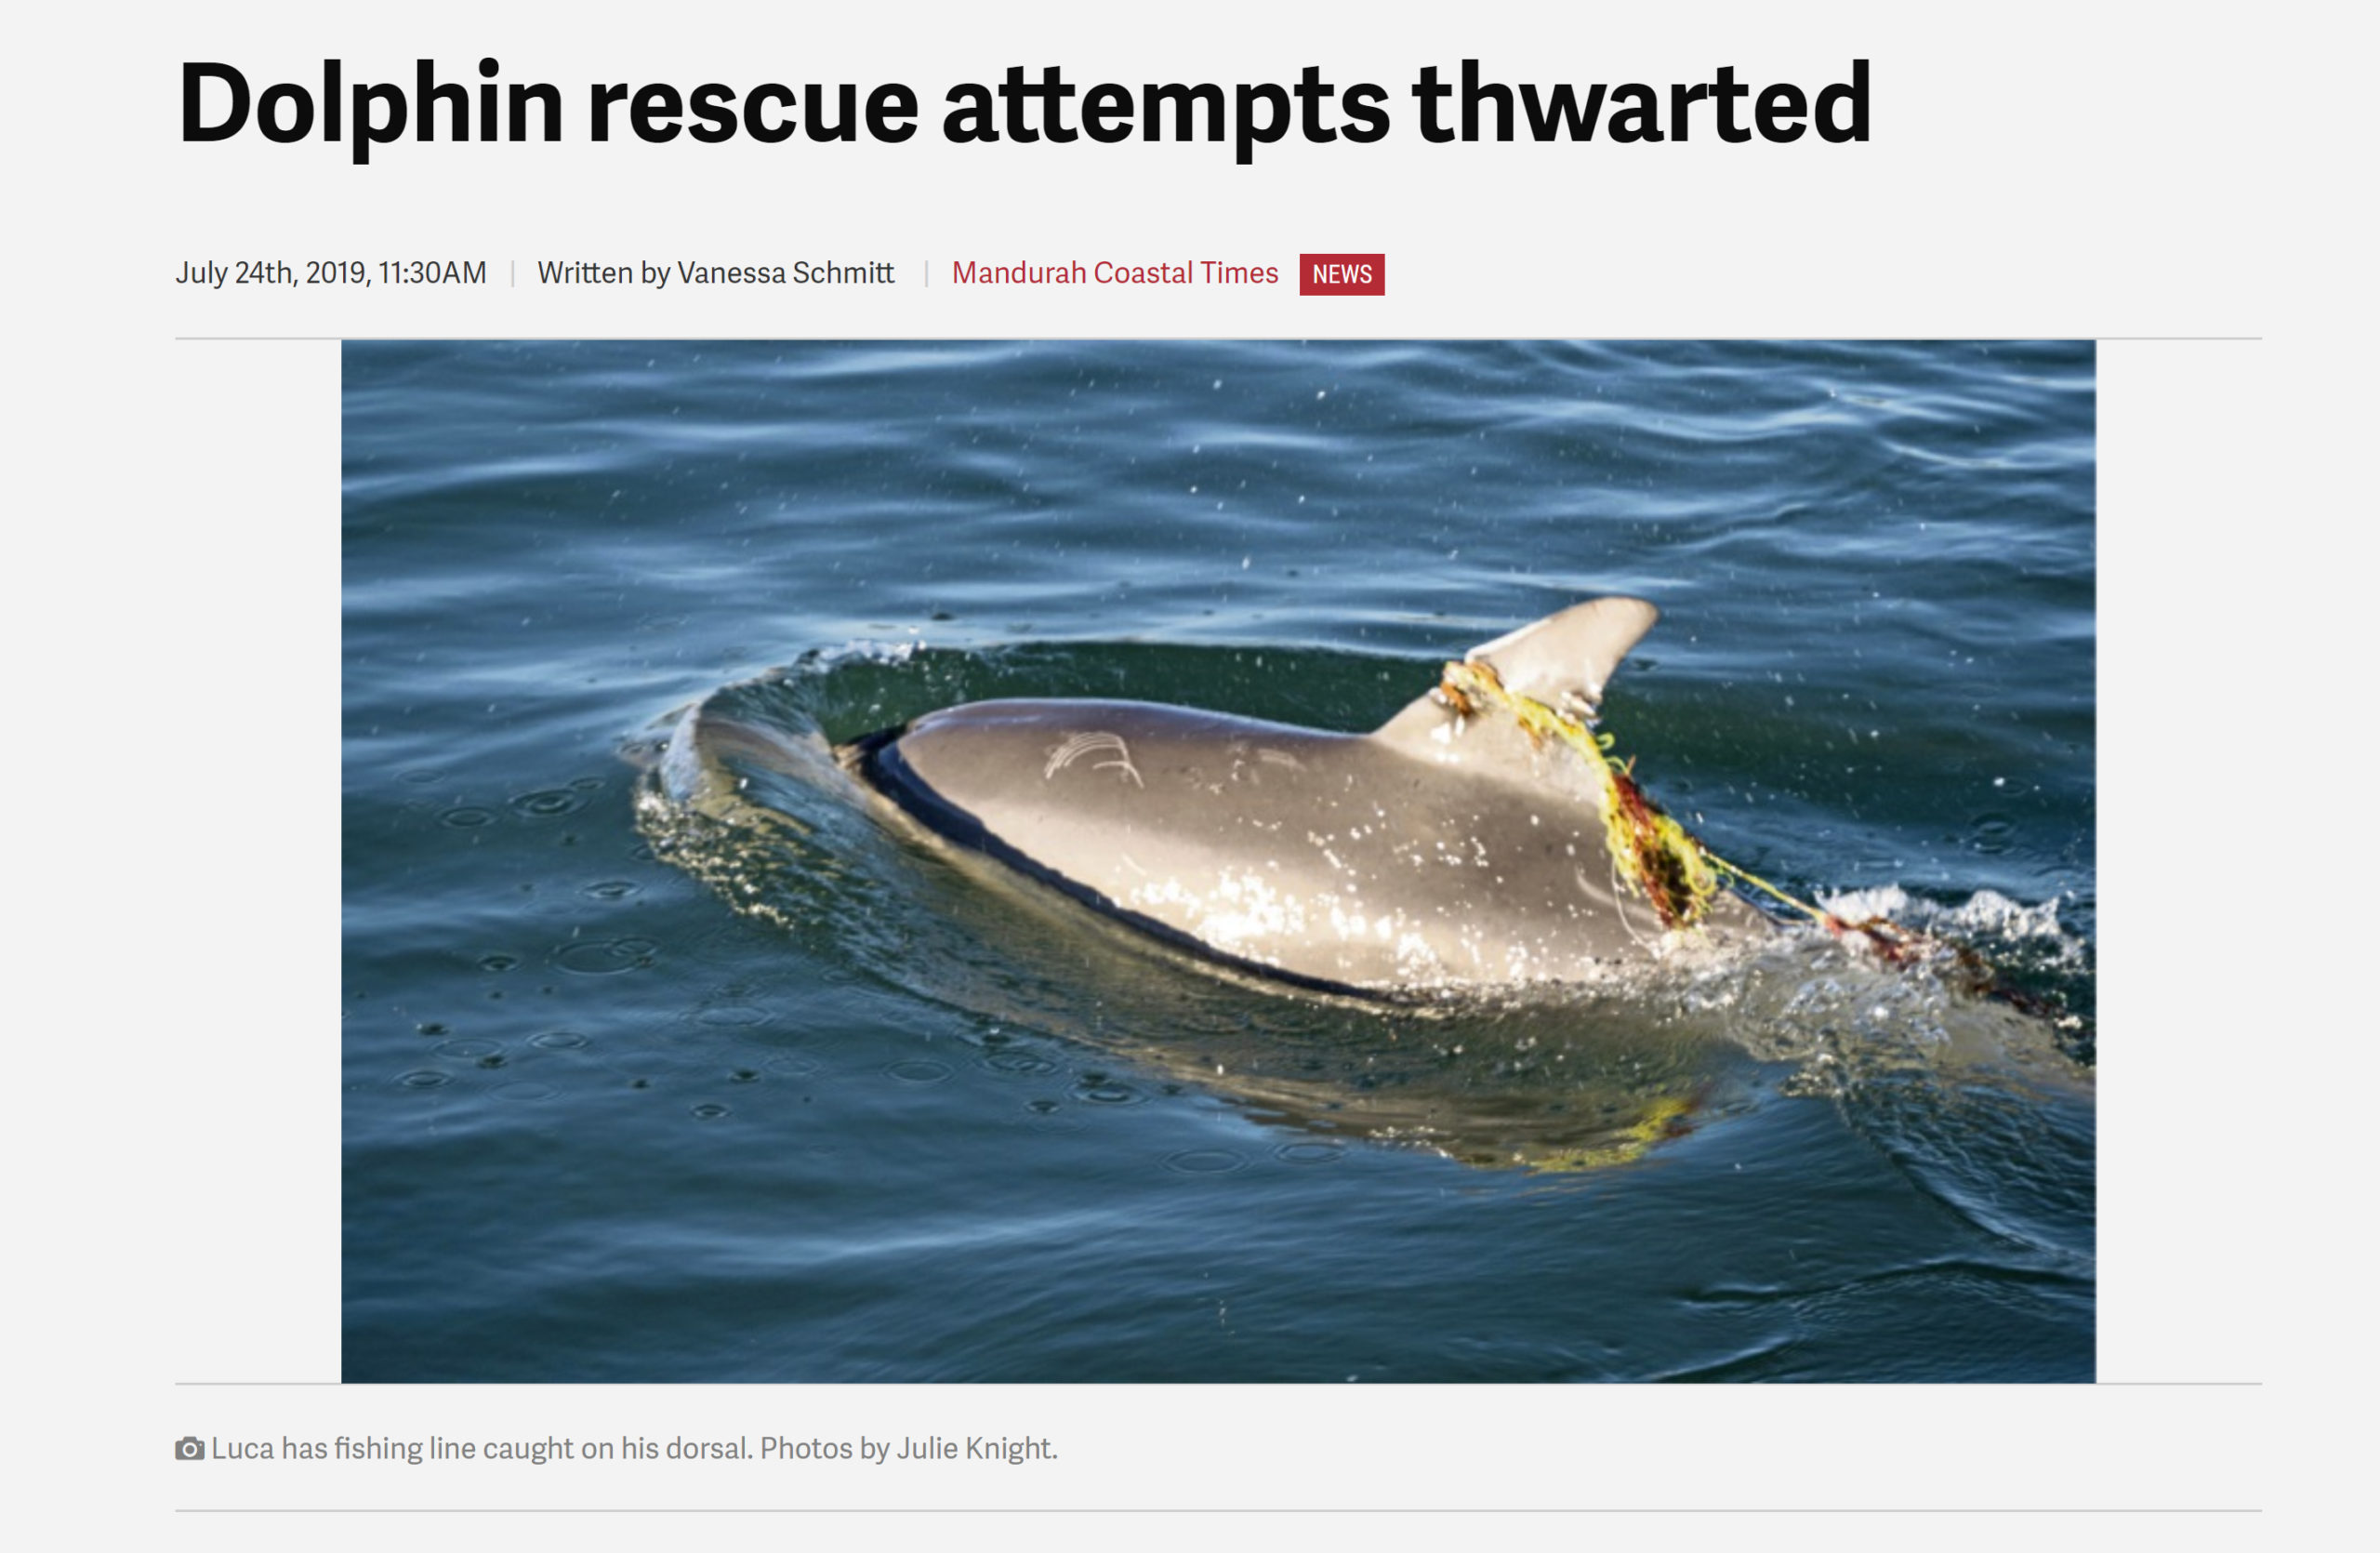 OUR THOUGHTS GO OUT FOR THE RESCUE OF  A DOLPHIN IN MANDURAH, WA.